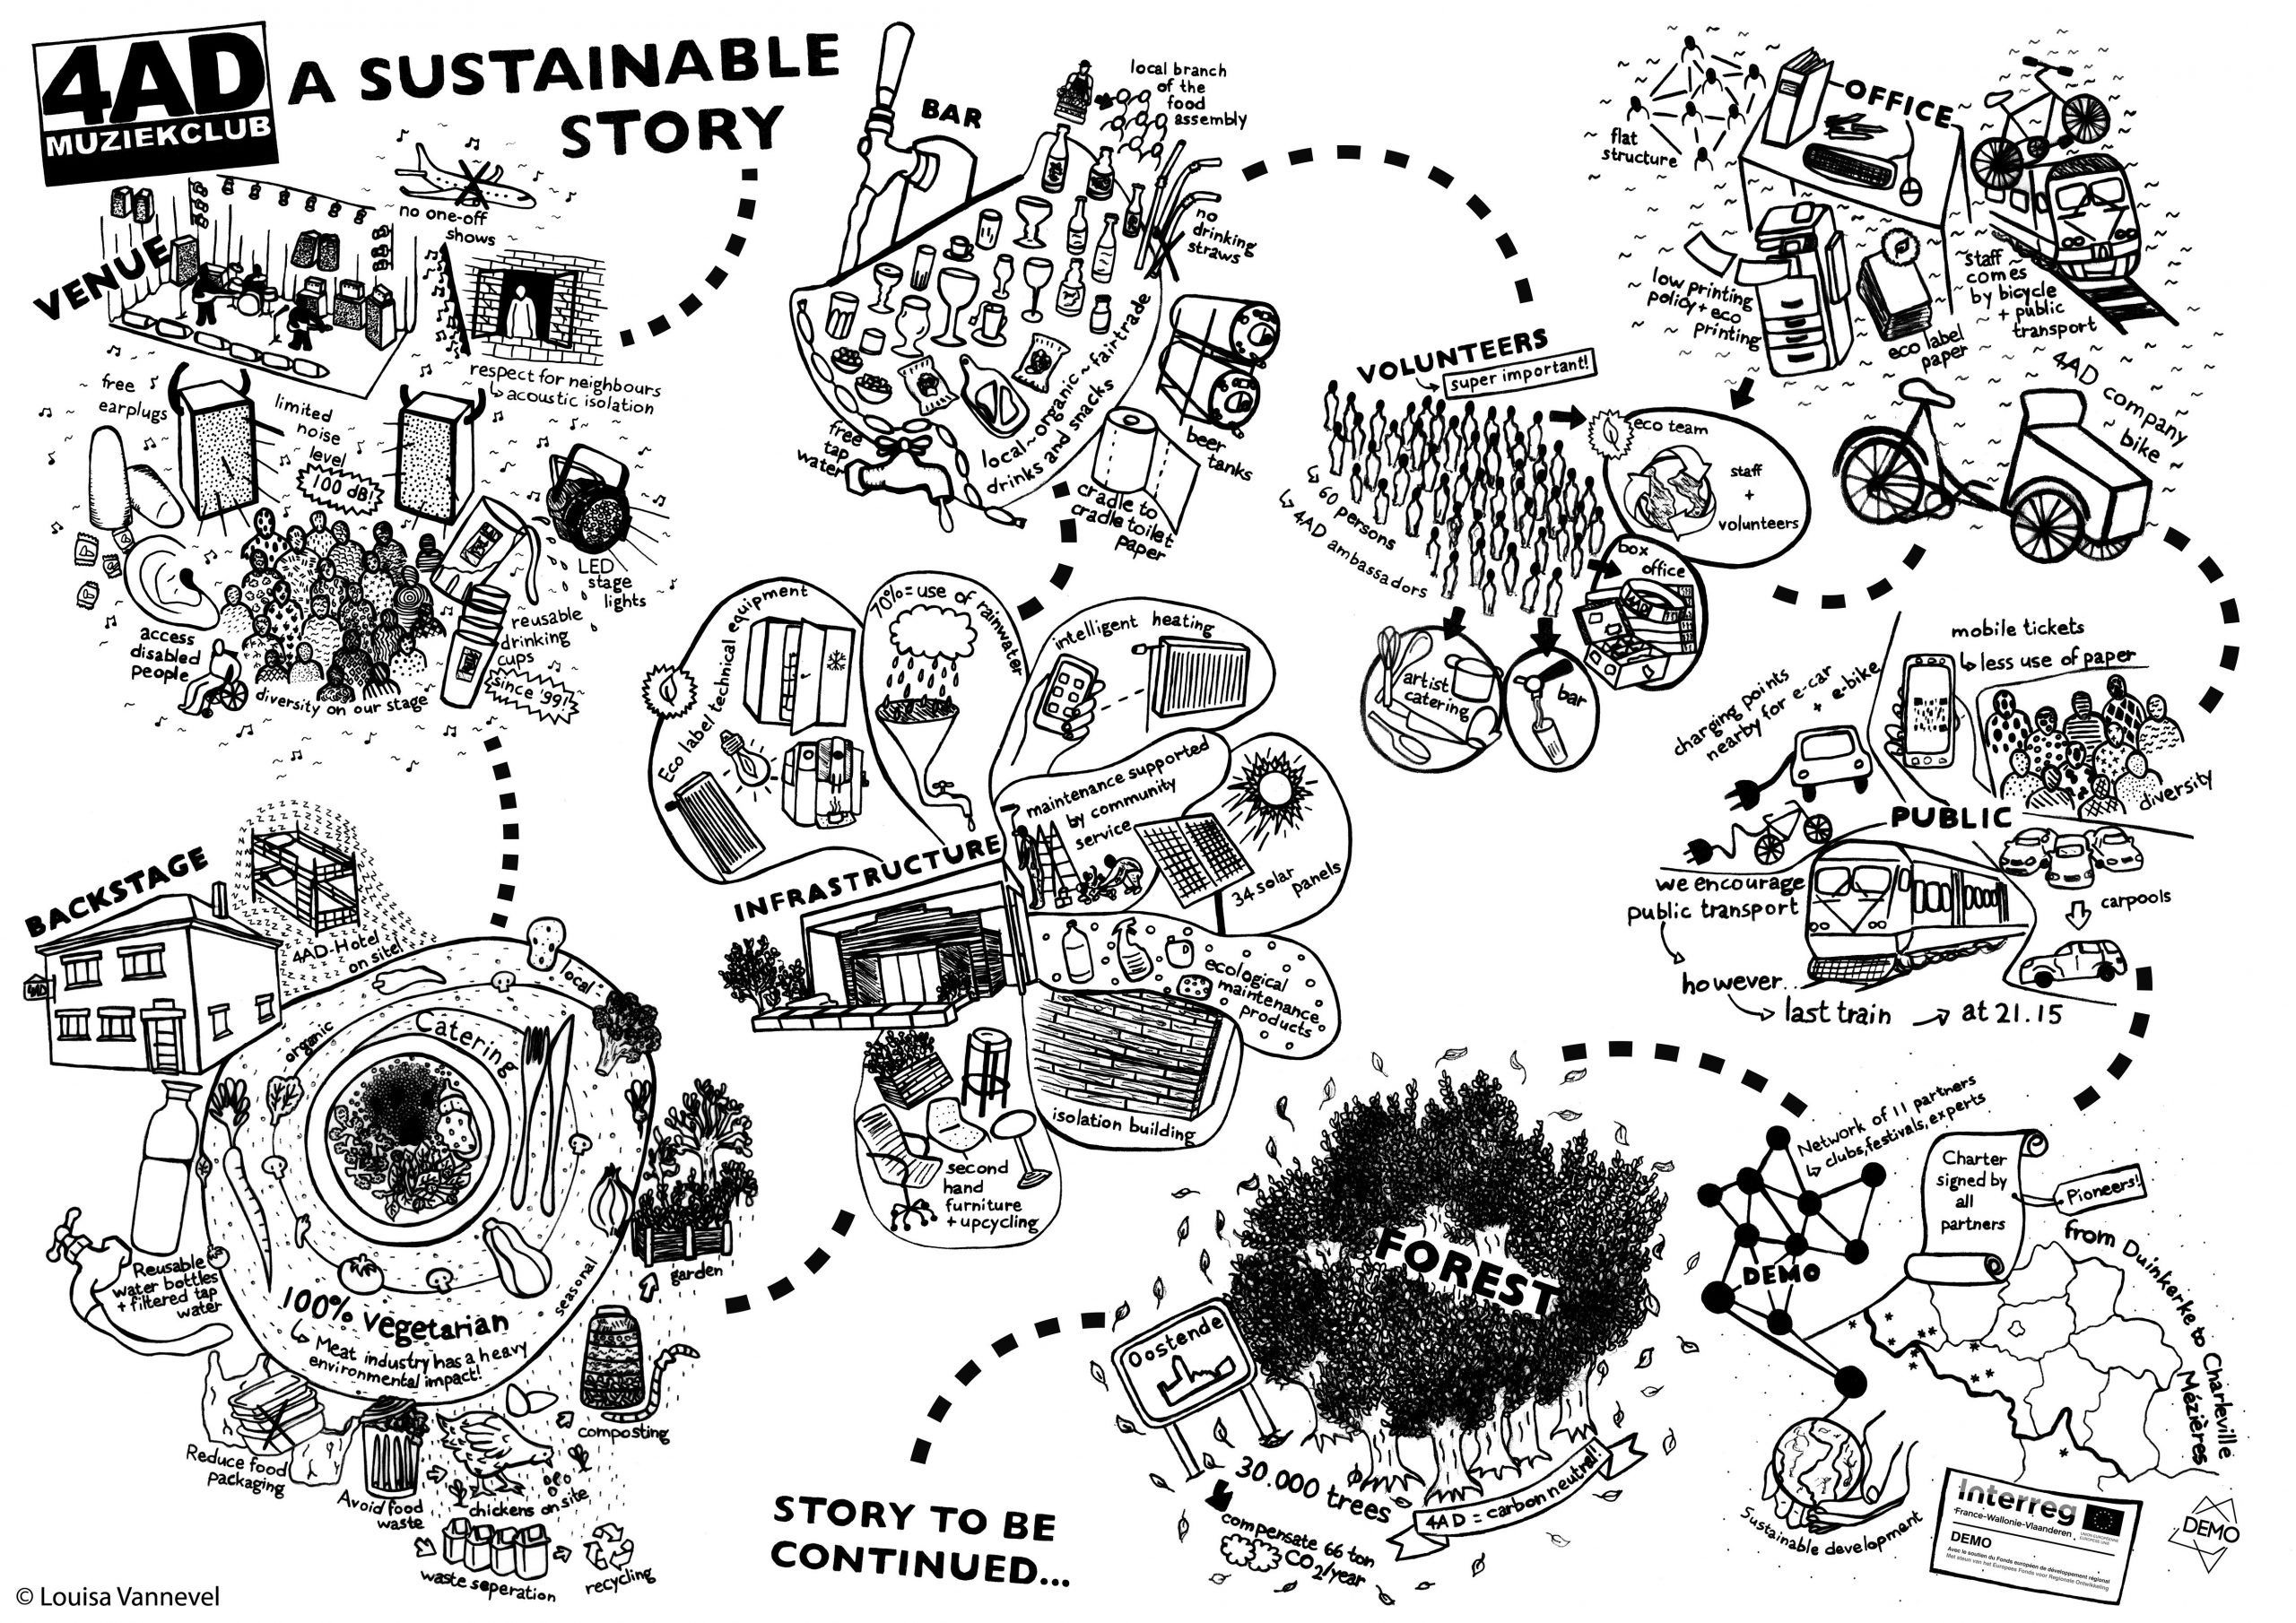 Sustainable practices and greening